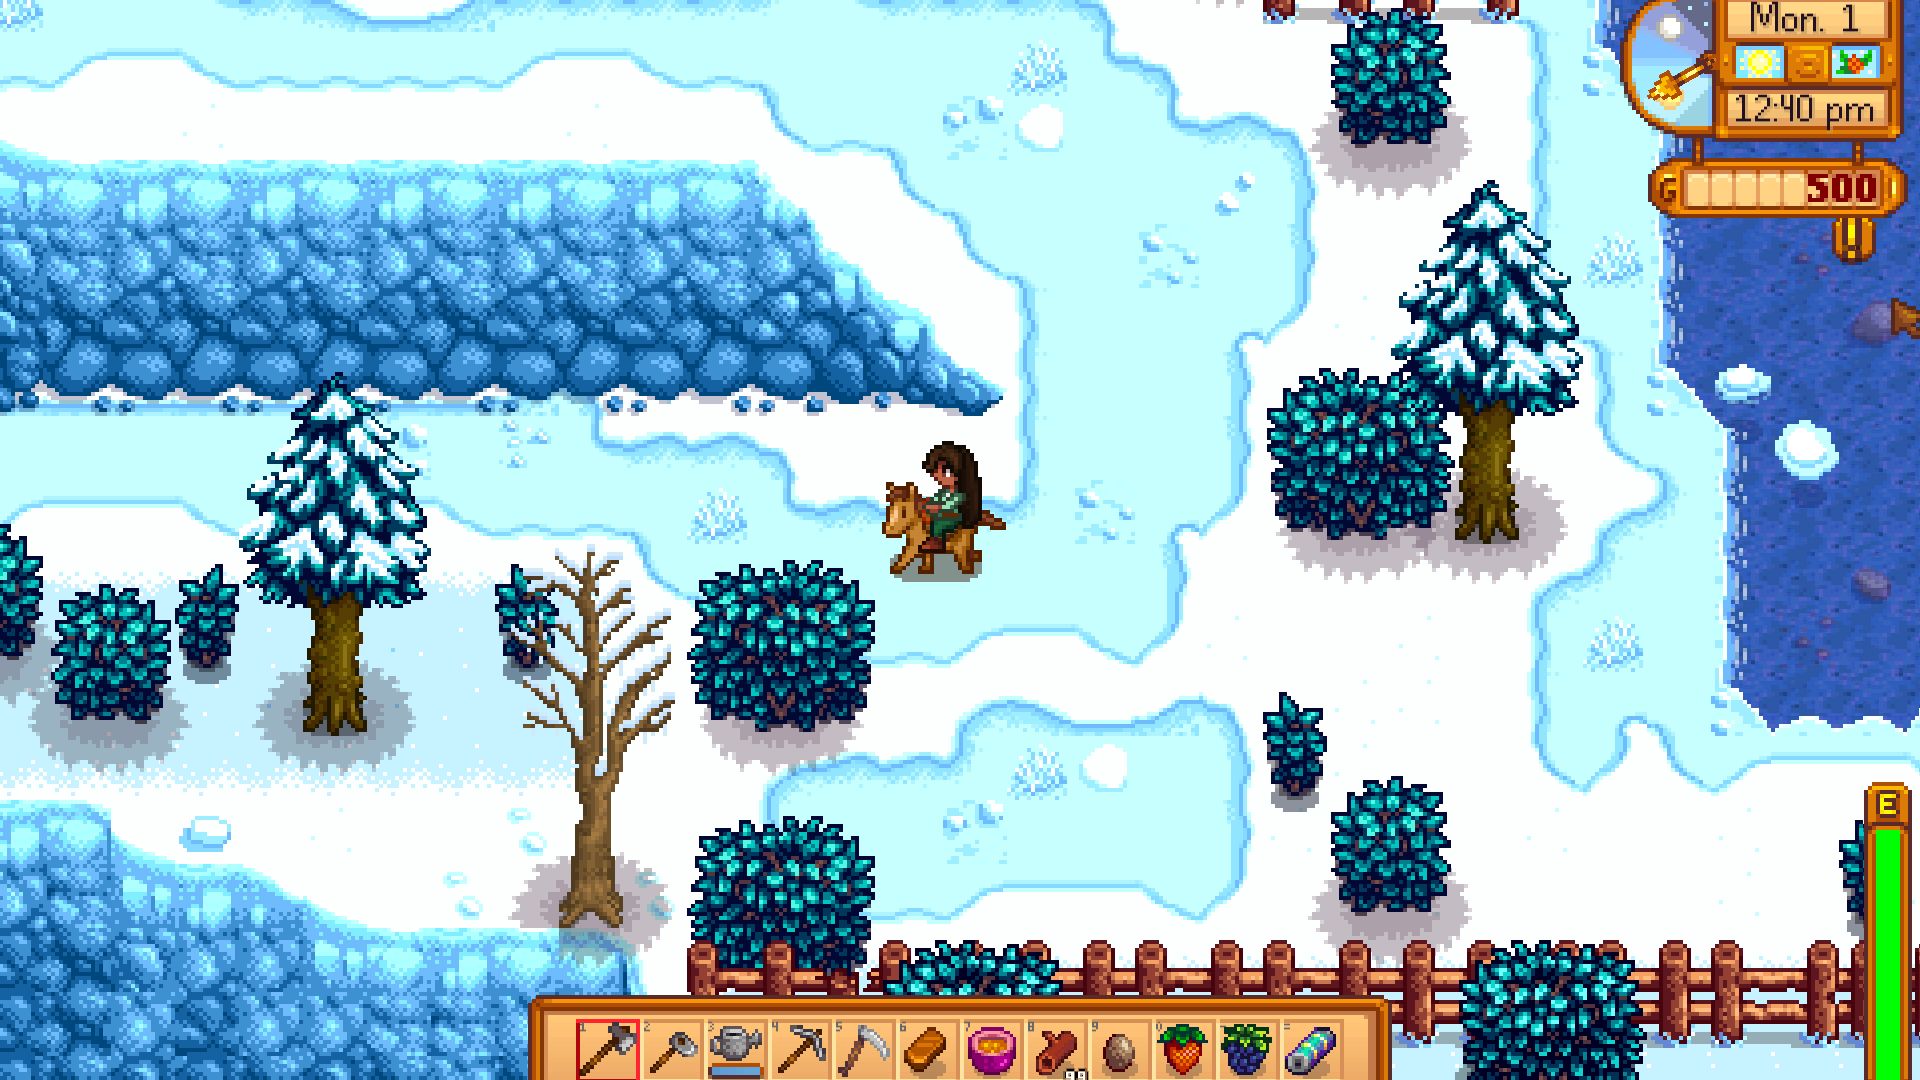 A character on a pony, on an icy field with trees and bushes, in the relaxing game Stardew Valley.